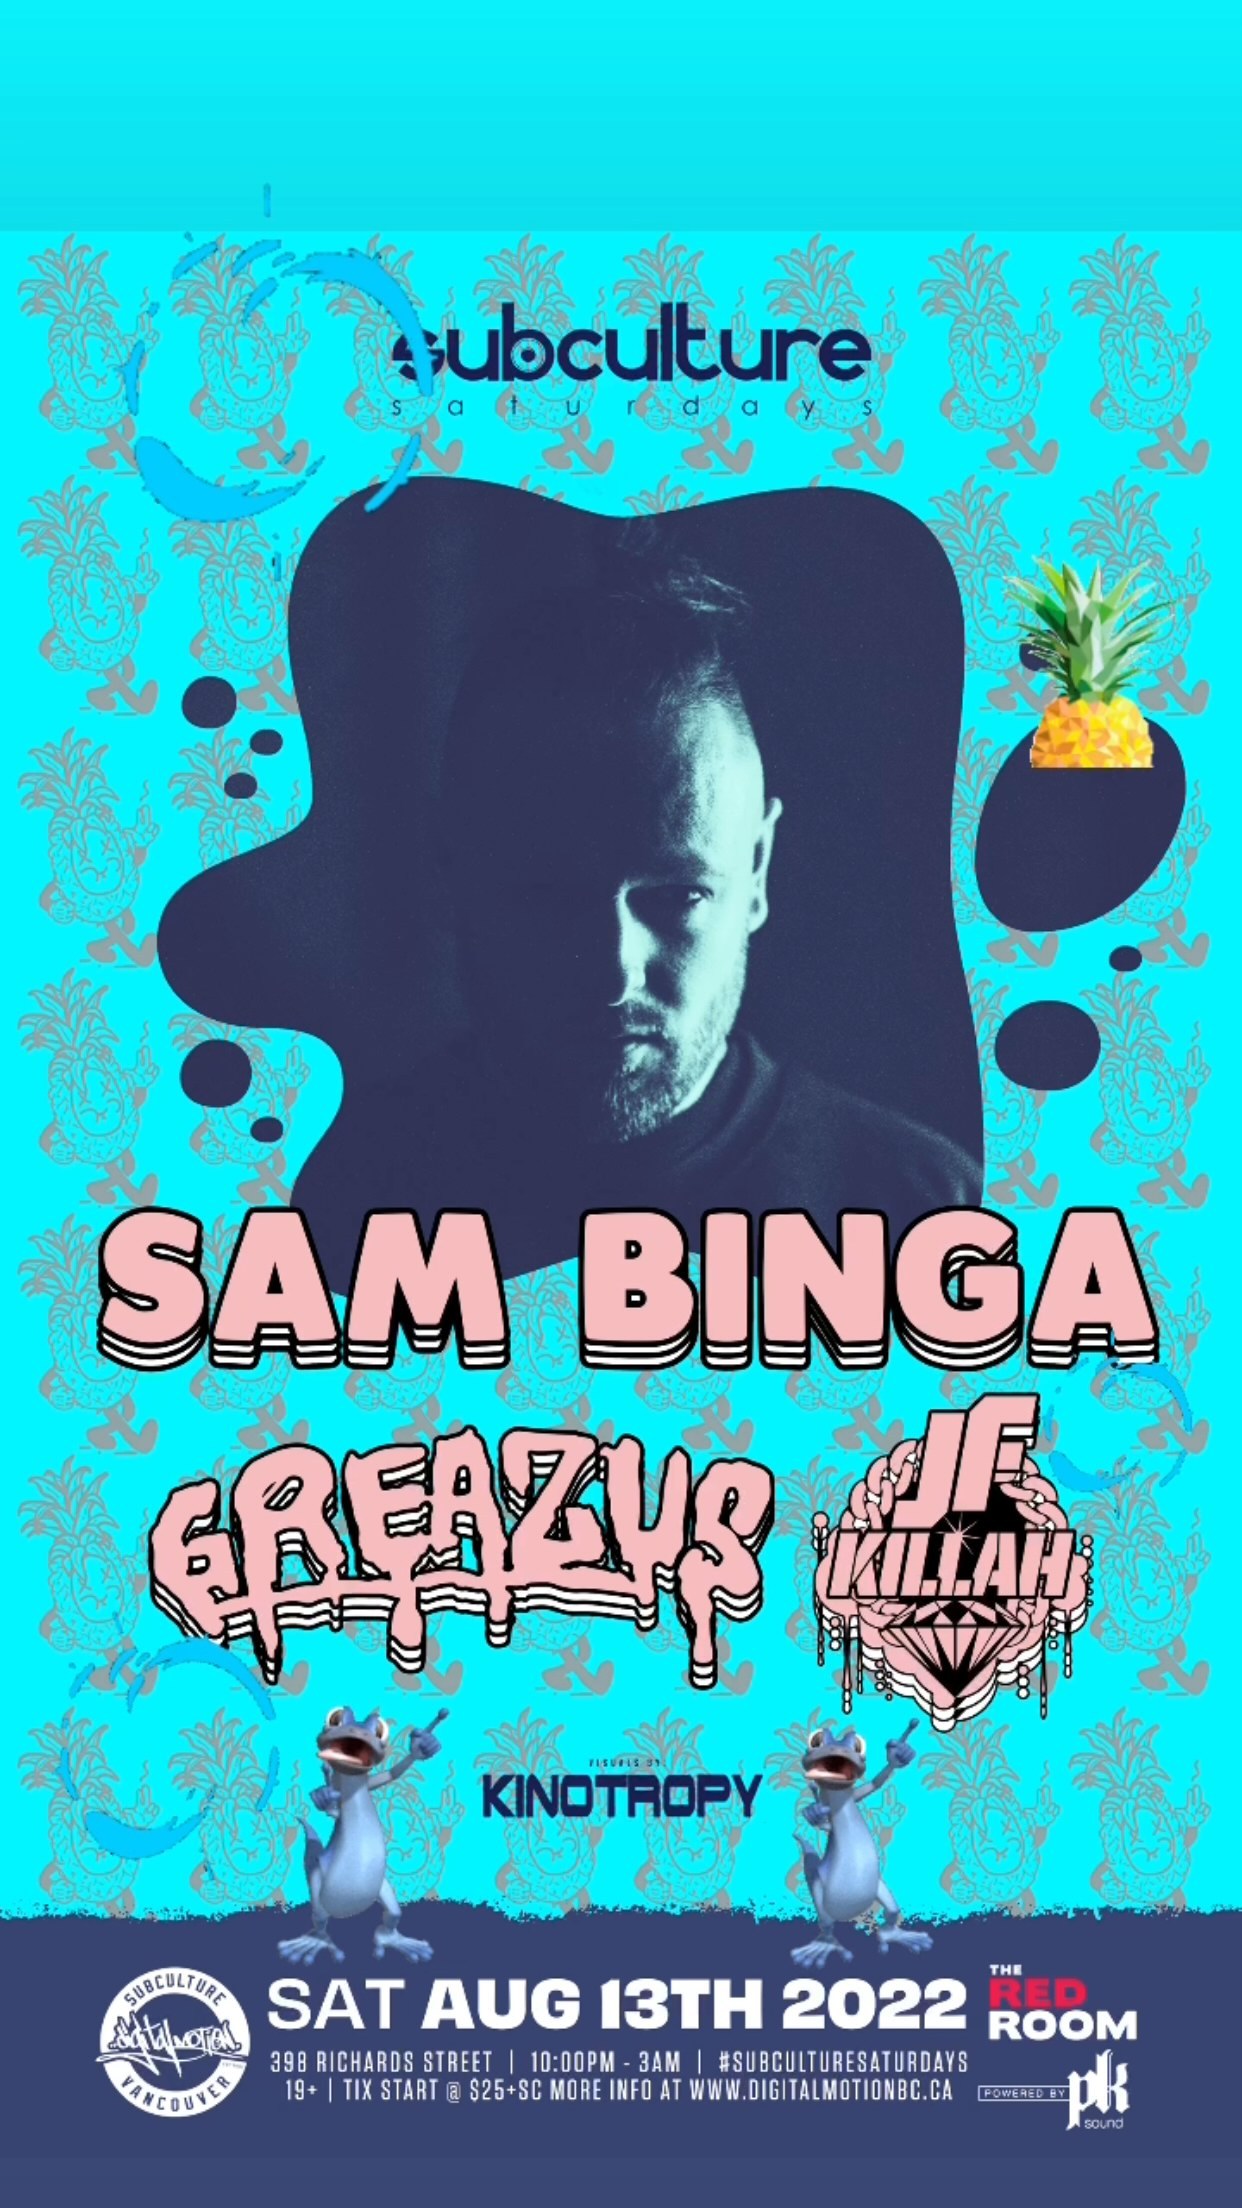 🚨announcement🚨Join us for a front to back stunner of a night august 13th that will showcase sound system culture in all it's glory! Don't miss the highly anticipated Vancouver return of Bristol UK Bass music producer @sambingamusic alongside Vancity favs @greazus @jfkillah w/ visuals powered by @kinotropy 🔊💯🎶🎉🍍 early bird tickets are now available on our site 🚨 #digitalmotionevents #digitalmotionbc #redroomvancouver #vancouvernightlife #vancouverbc #vancouvernightclub #subculturesaturdays